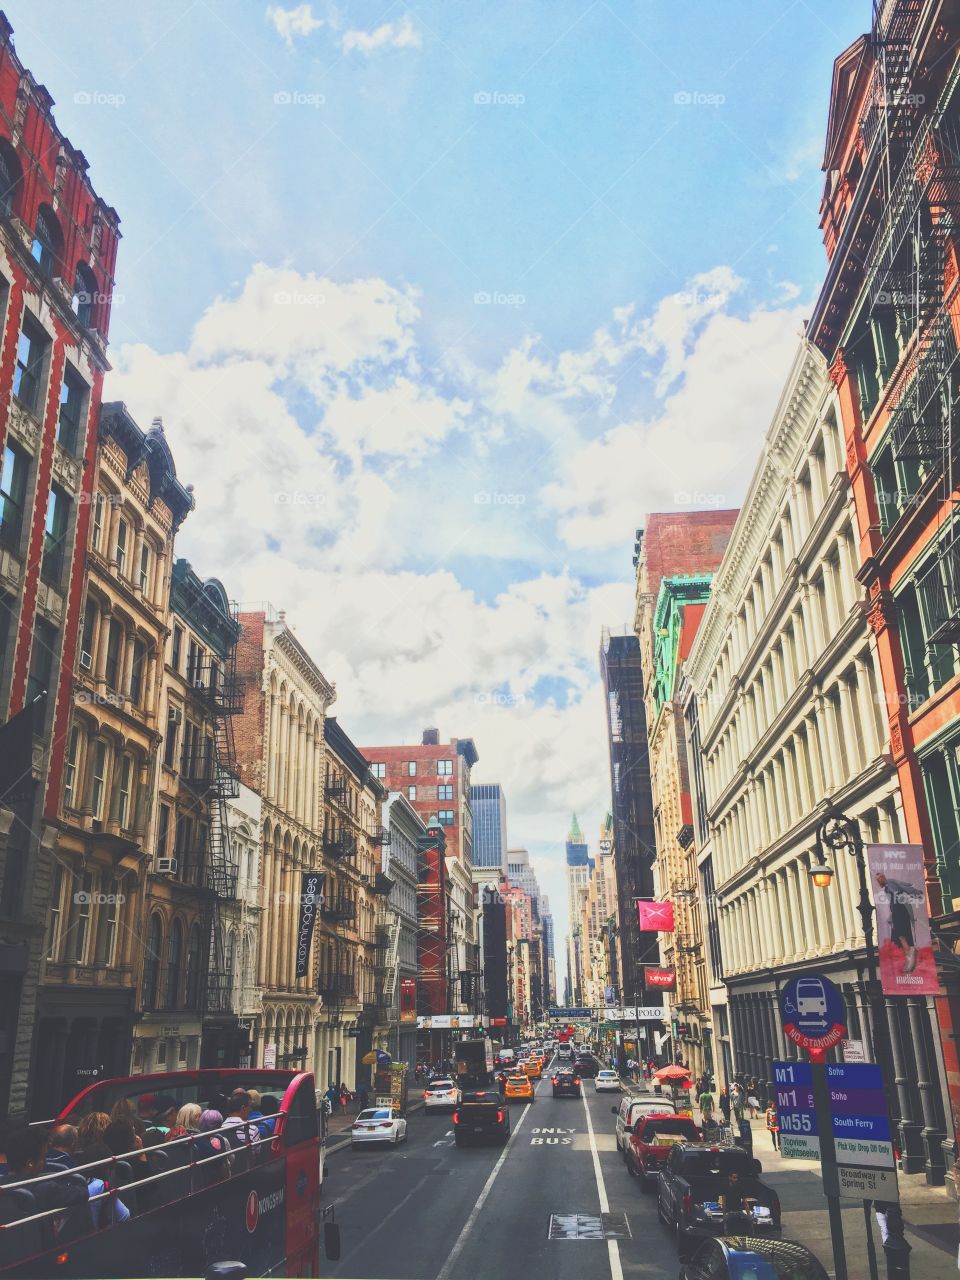 Tour bus views in a bustling, colorful New York street. Surrounded by beautiful old buildings and the warm summer air. 